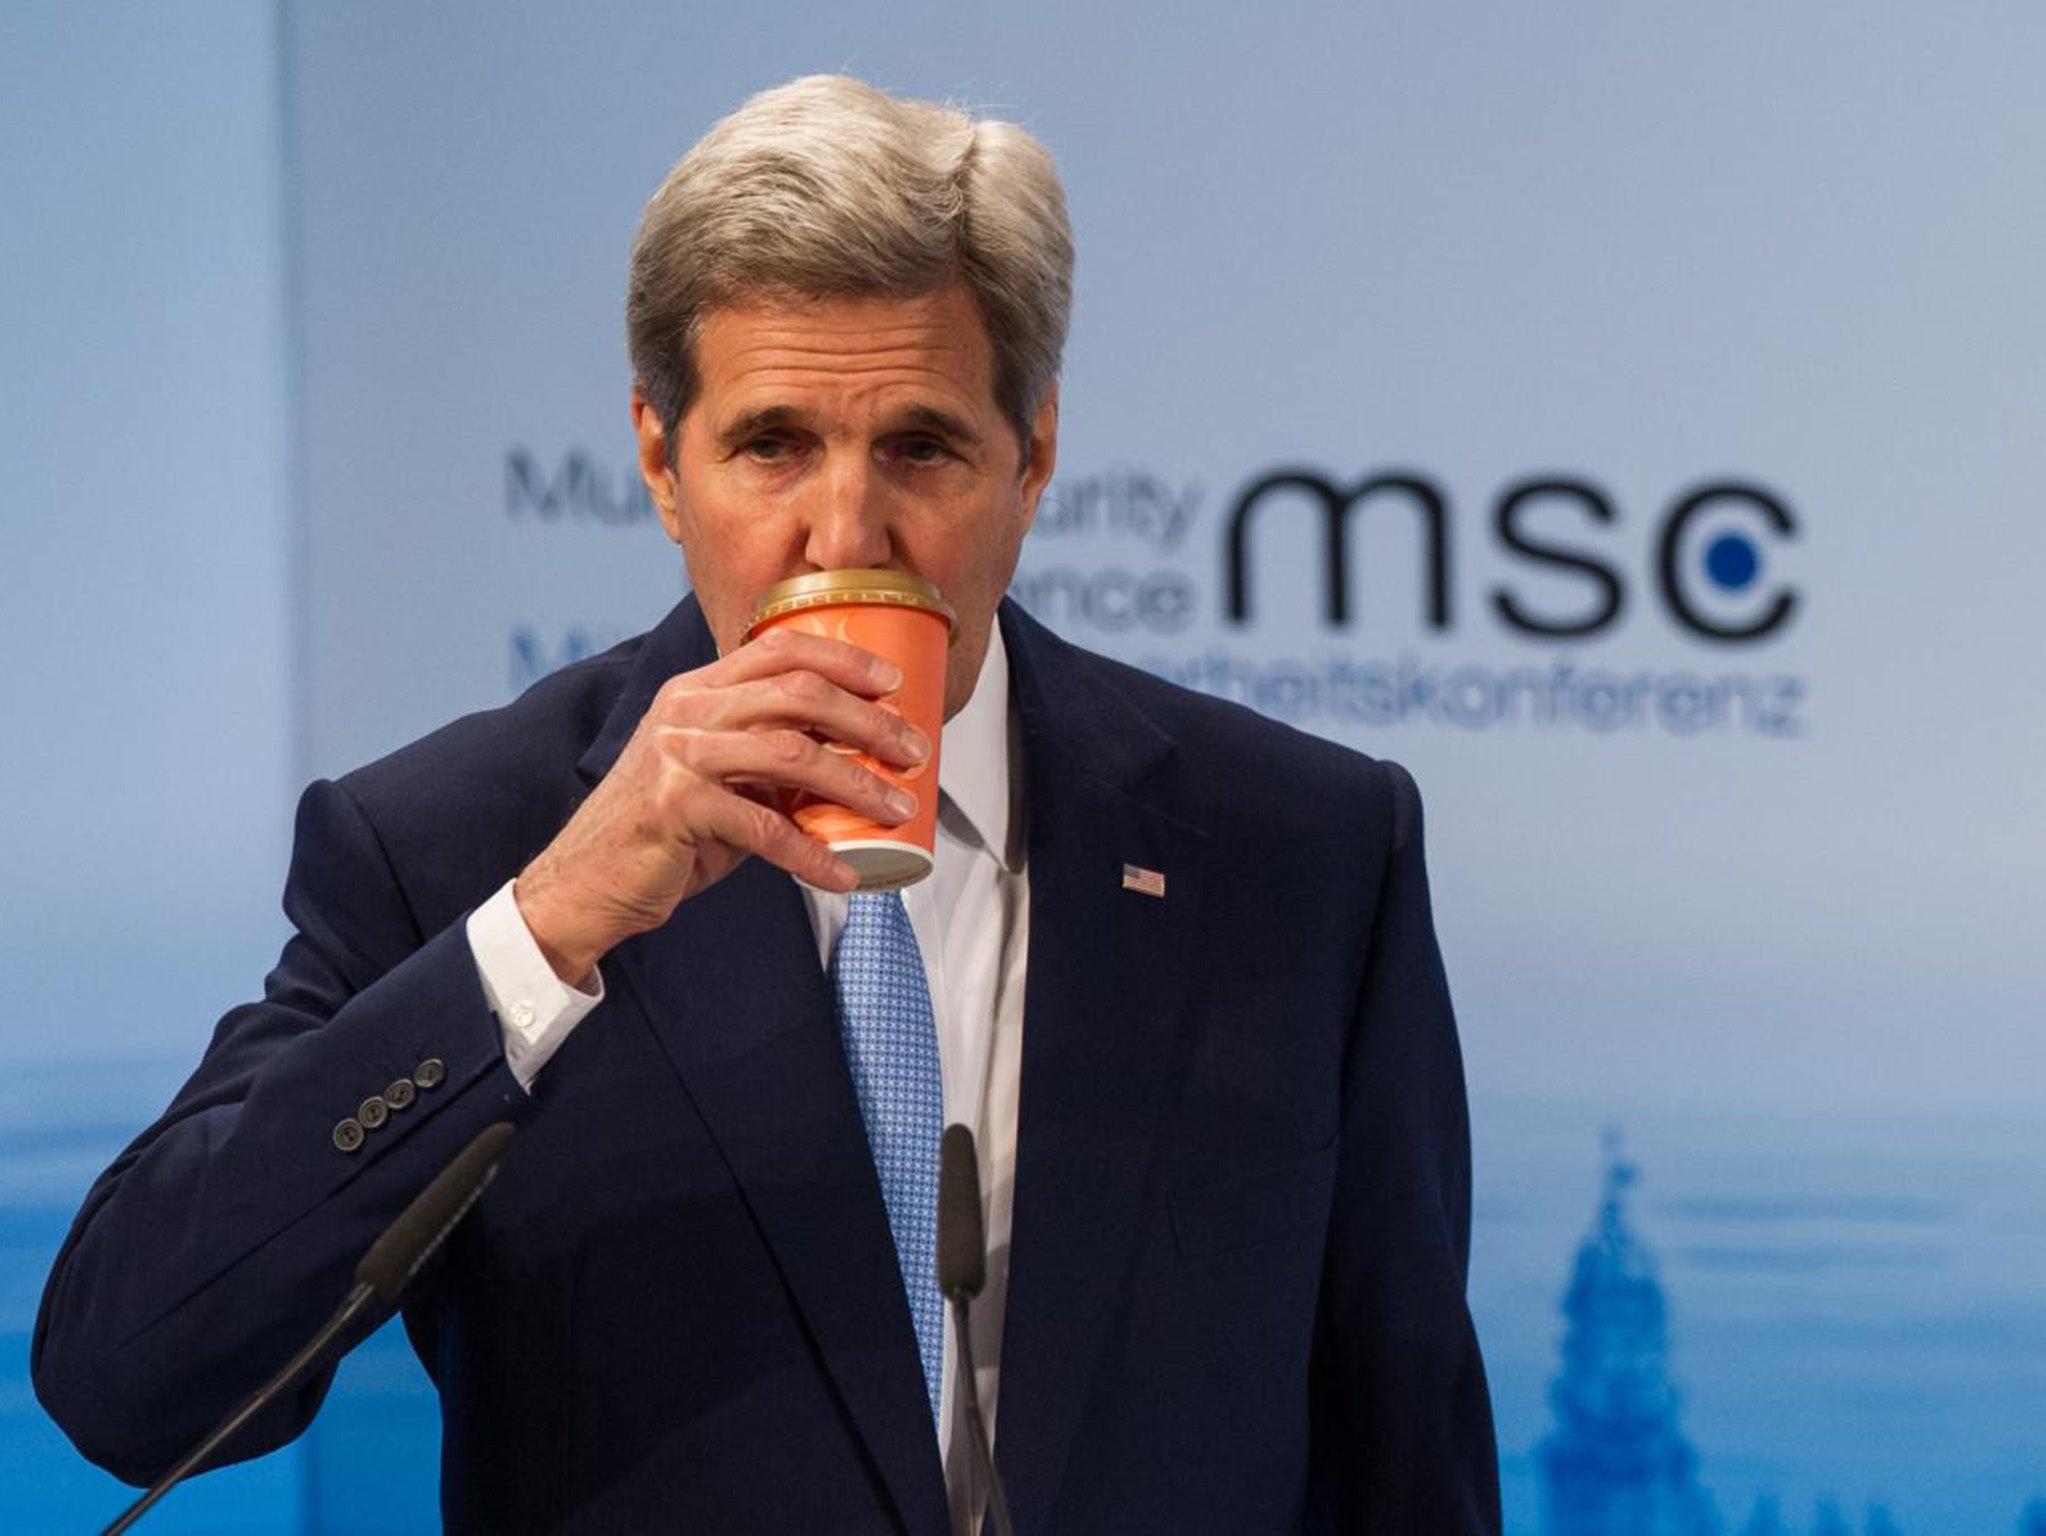 One MP referred John Kerry to US Declaration of Independence Getty Images